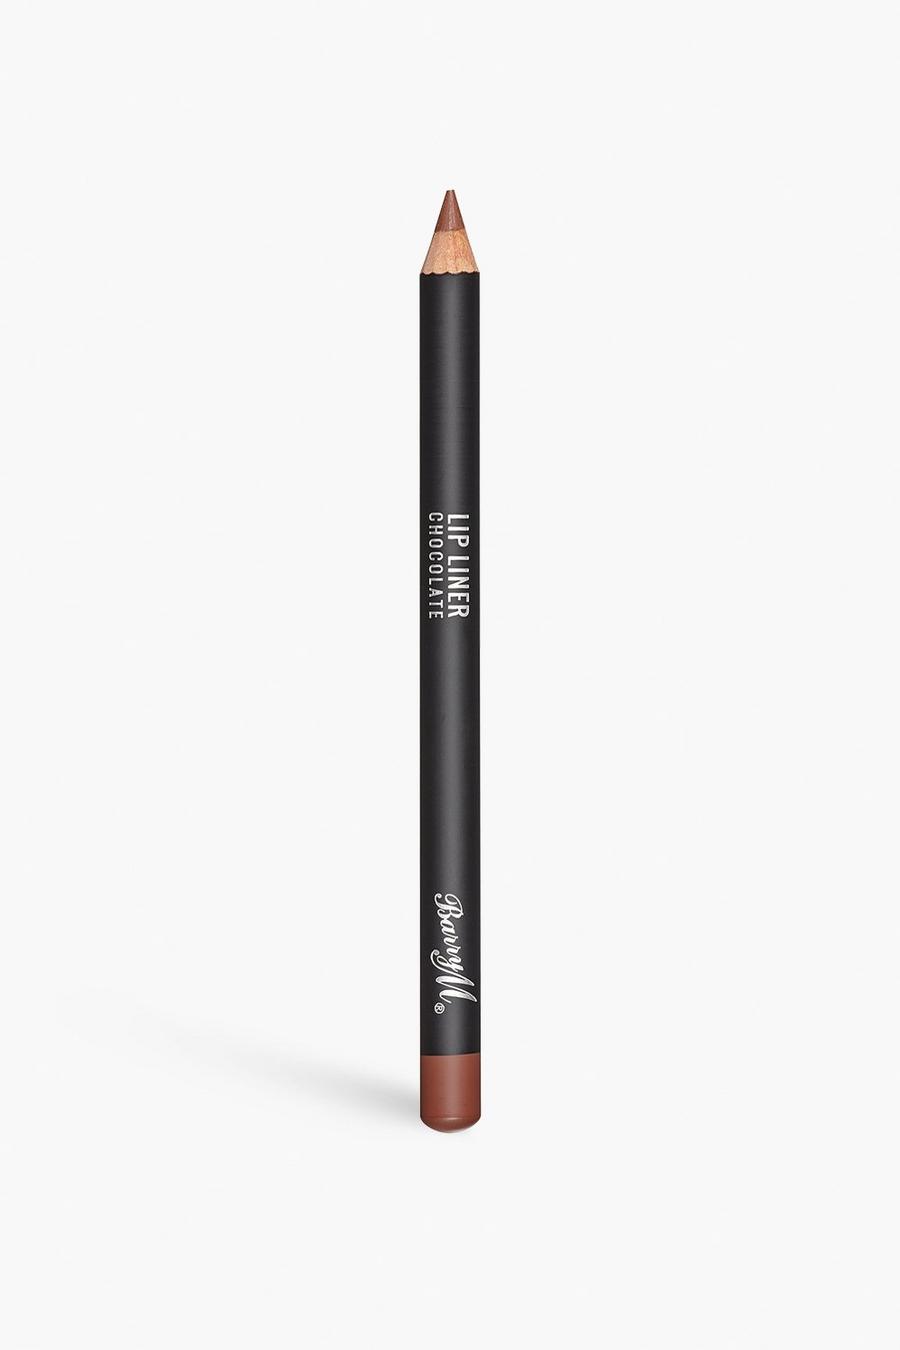 Brown Barry M Lip Liner - Chocolate image number 1